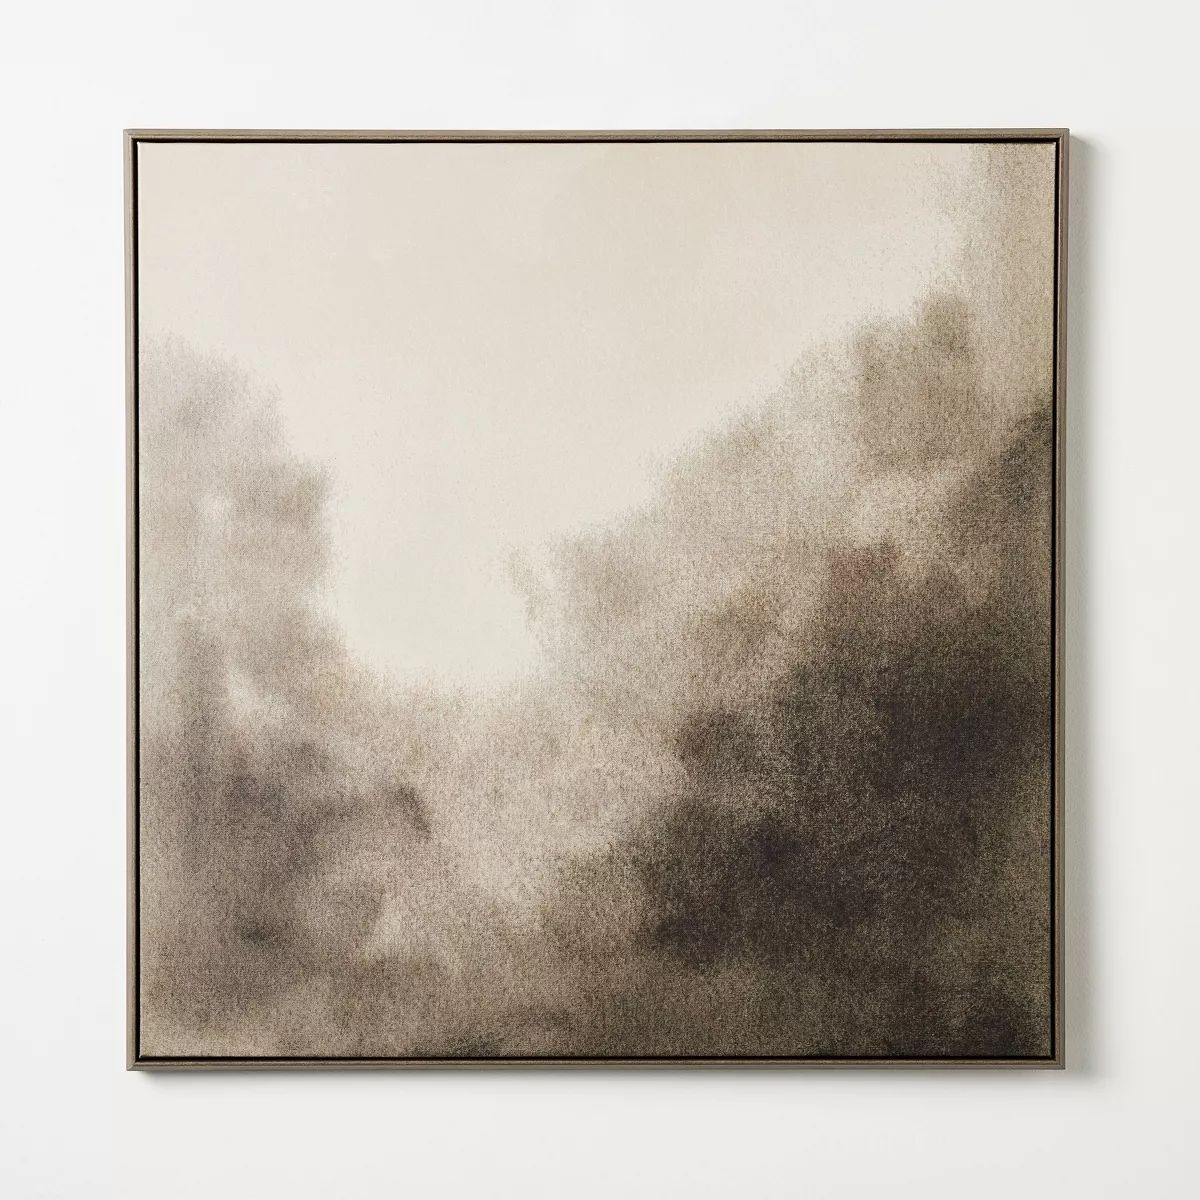 30"x30" Blurry Treetops Framed Wall Art Canvas Board - Threshold™ designed with Studio McGee | Target